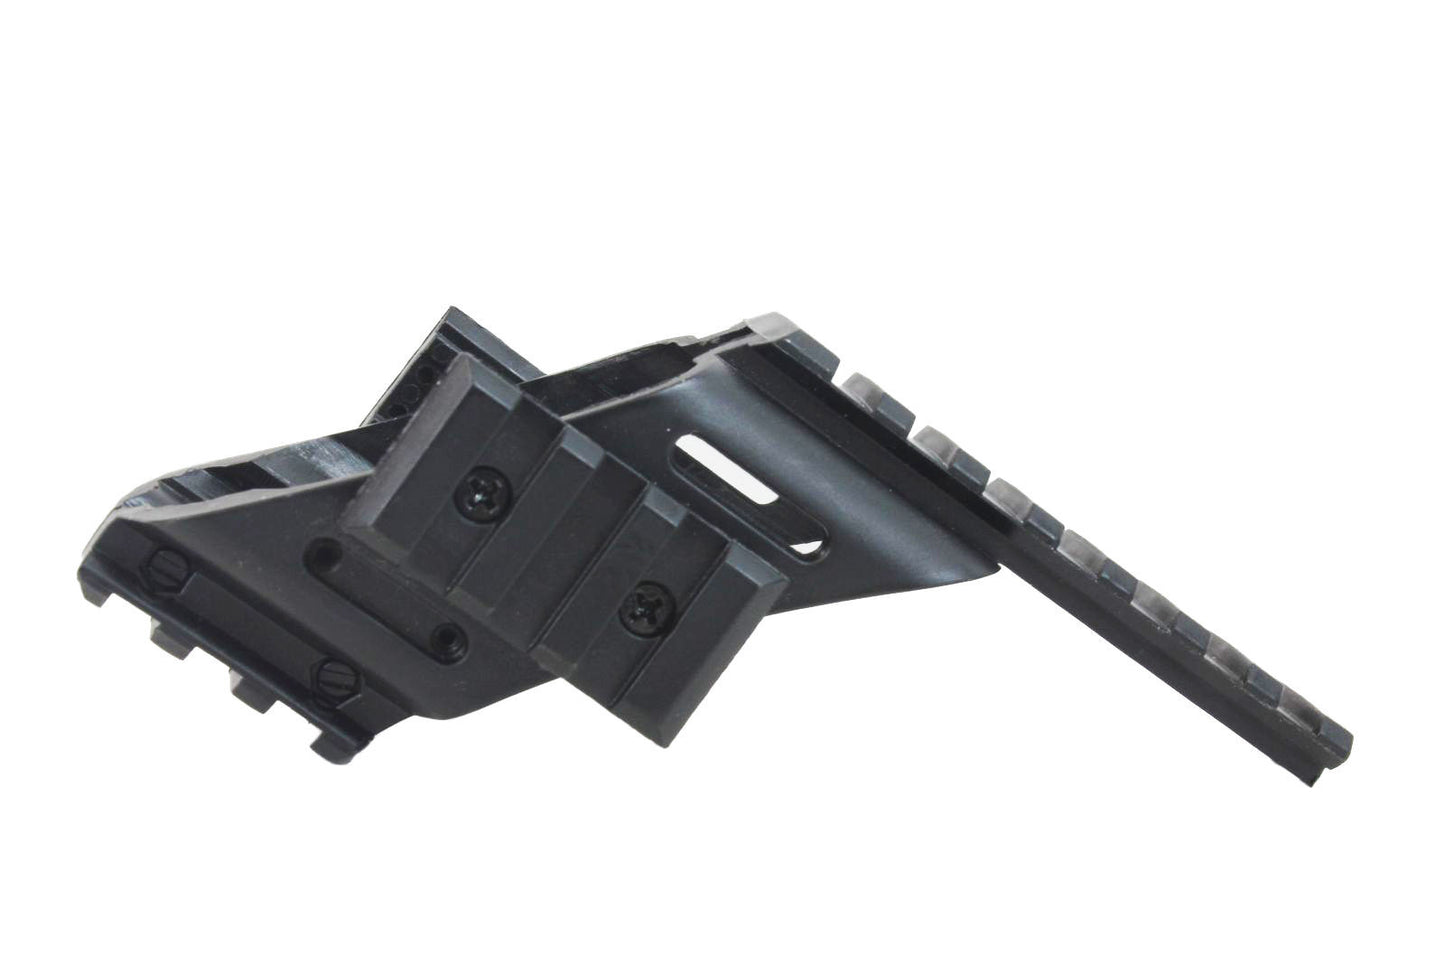 Slip On 4 Way Accessory Rail Mounting Component